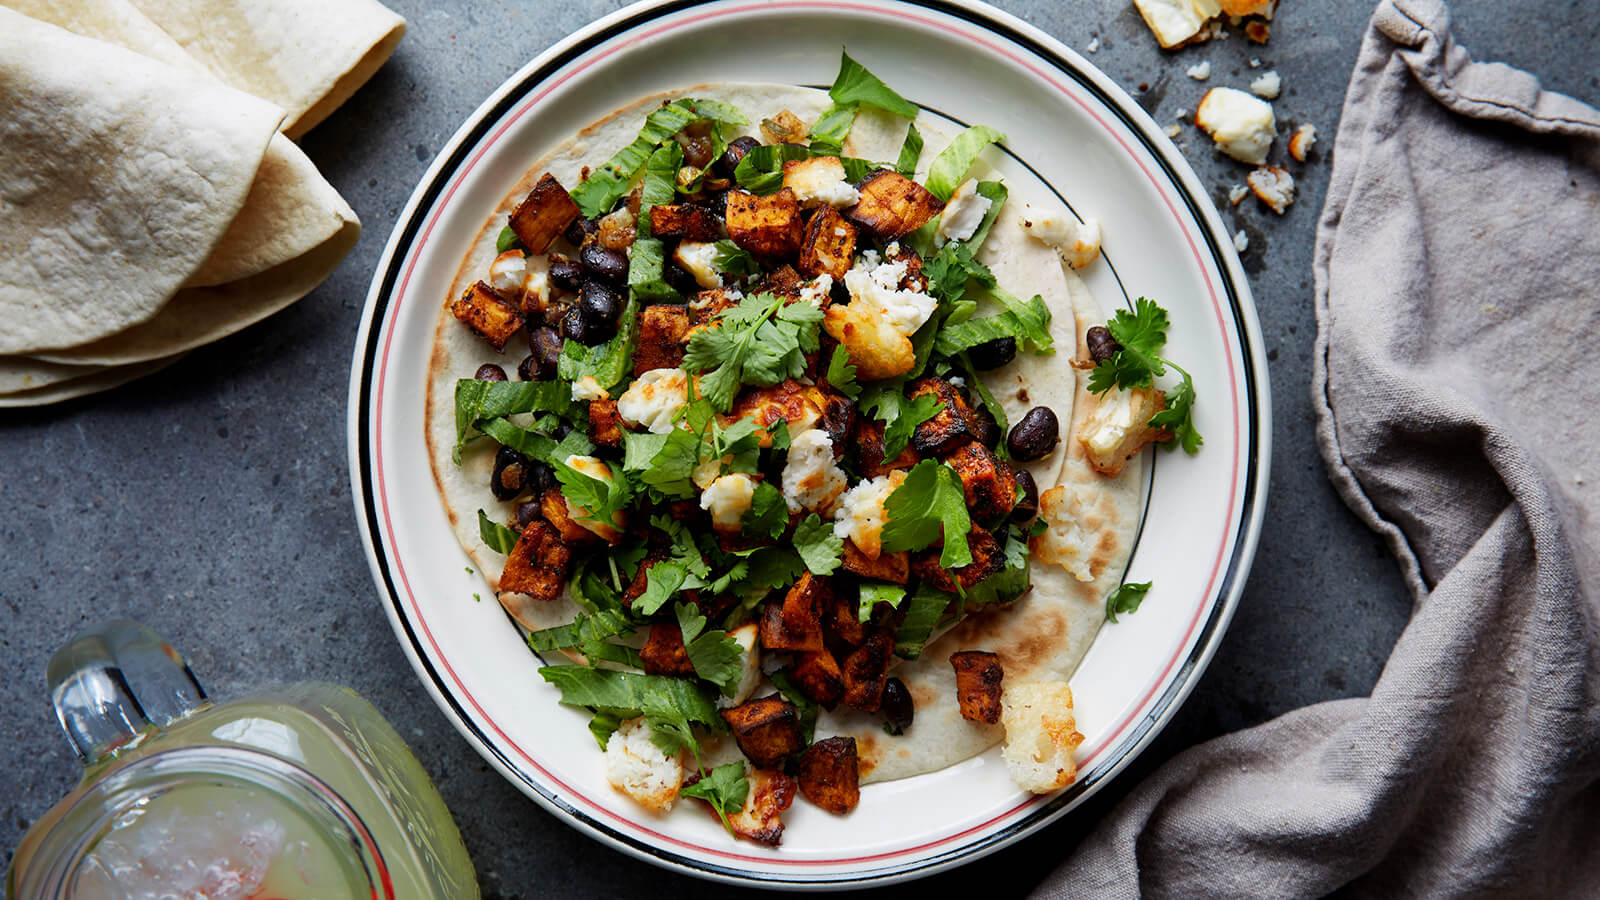 sweet-potato-taco-with-black-chipotle-beans-and-roasted-goat-cheese.jpg